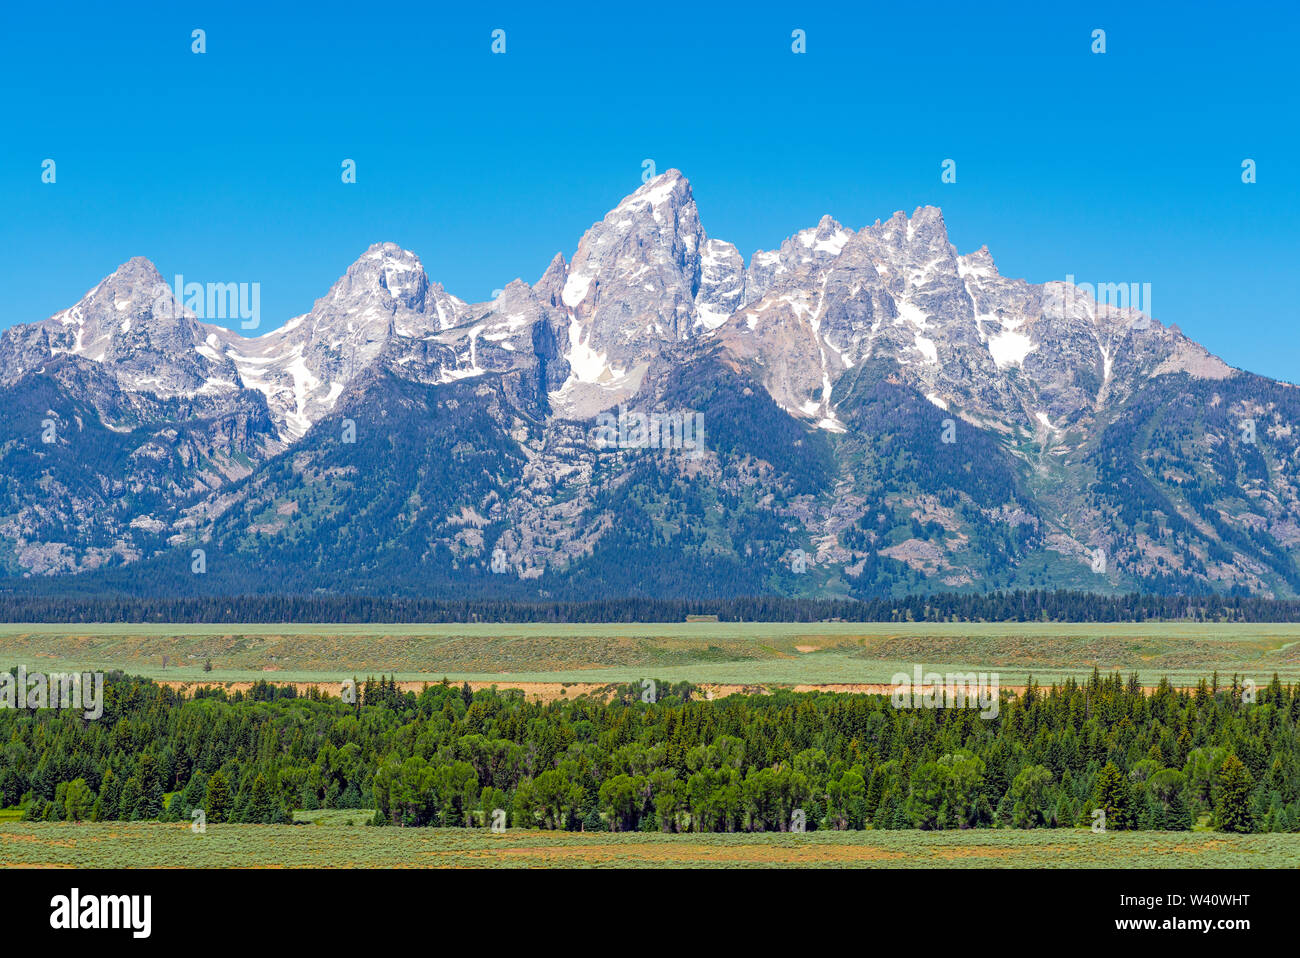 Grand Teton mountain range in summer with a pine tree forest, Grand Teton National Park, Rocky Mountains, Wyoming, United States of America, USA. Stock Photo